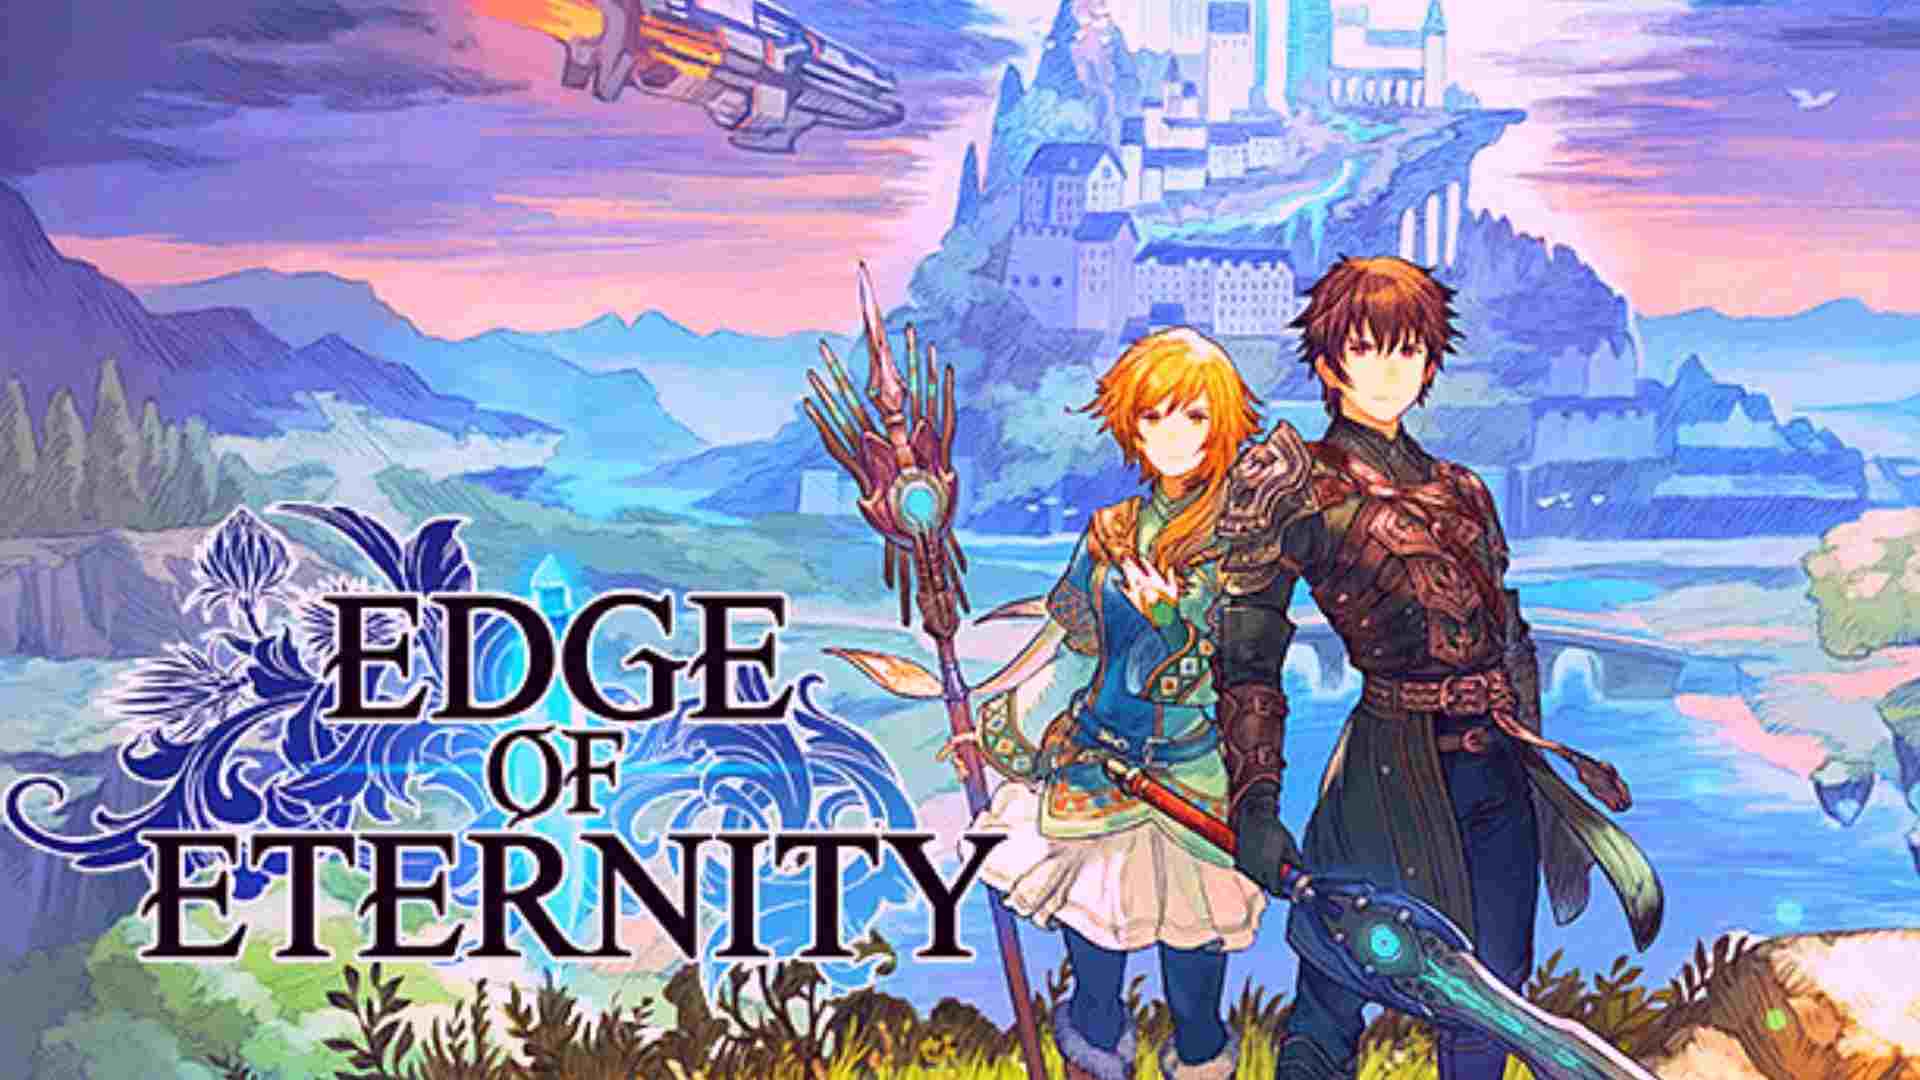 Edge of Eternity Parents Guide and Age Rating 2021 Video Game 1